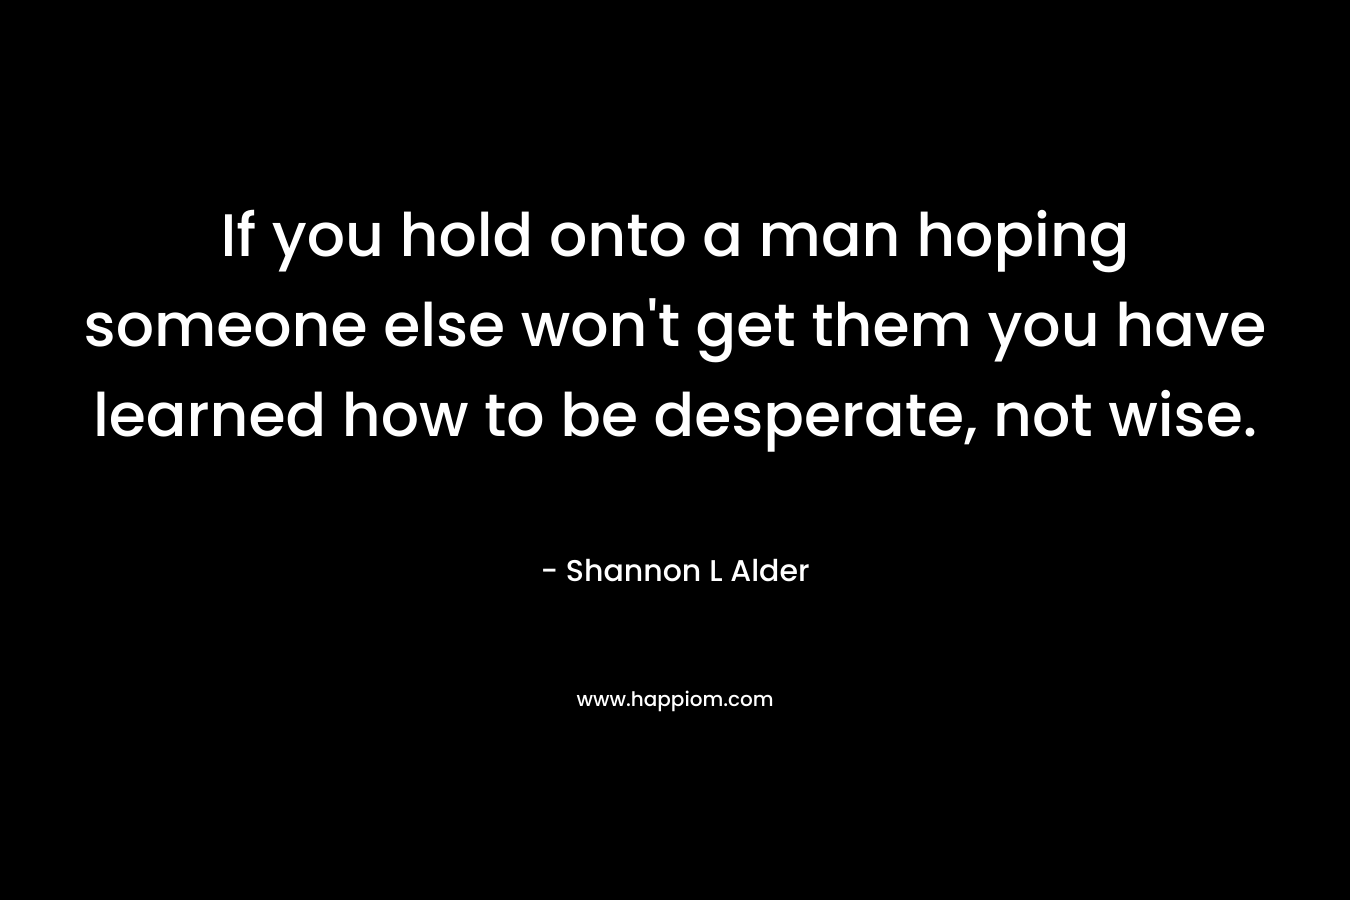 If you hold onto a man hoping someone else won't get them you have learned how to be desperate, not wise.